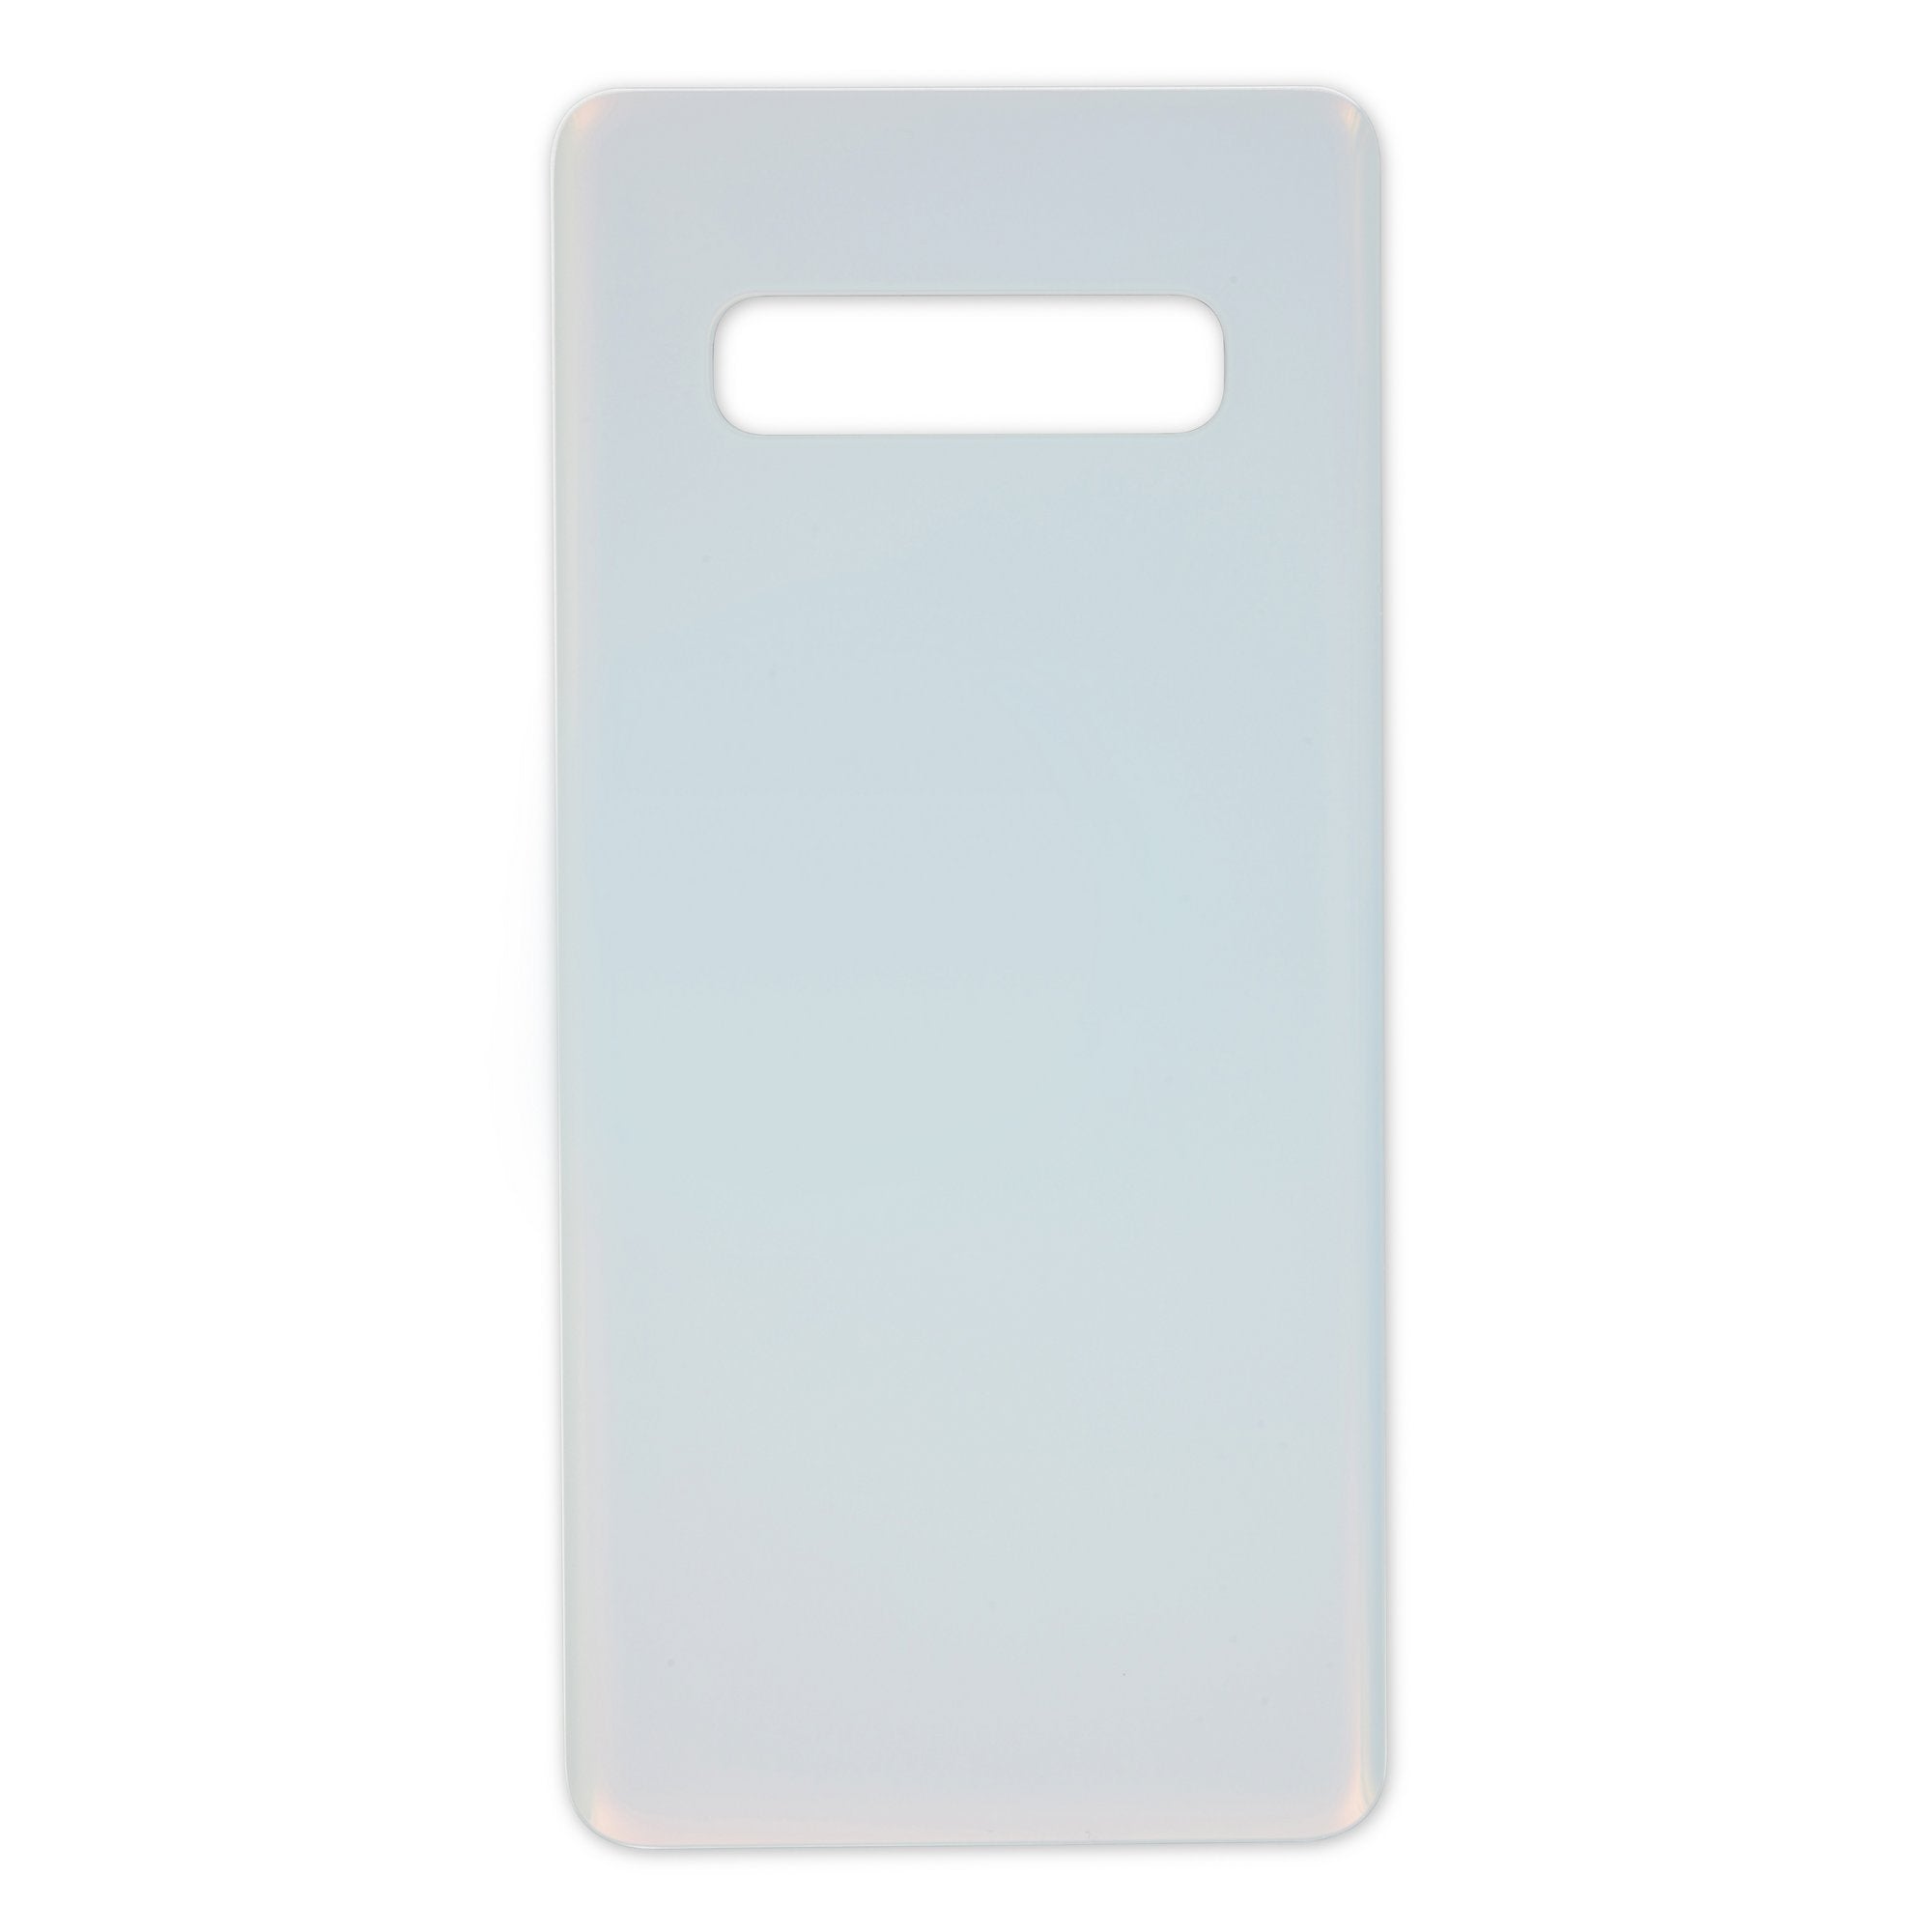 Galaxy S10+ Rear Glass Panel/Cover White New